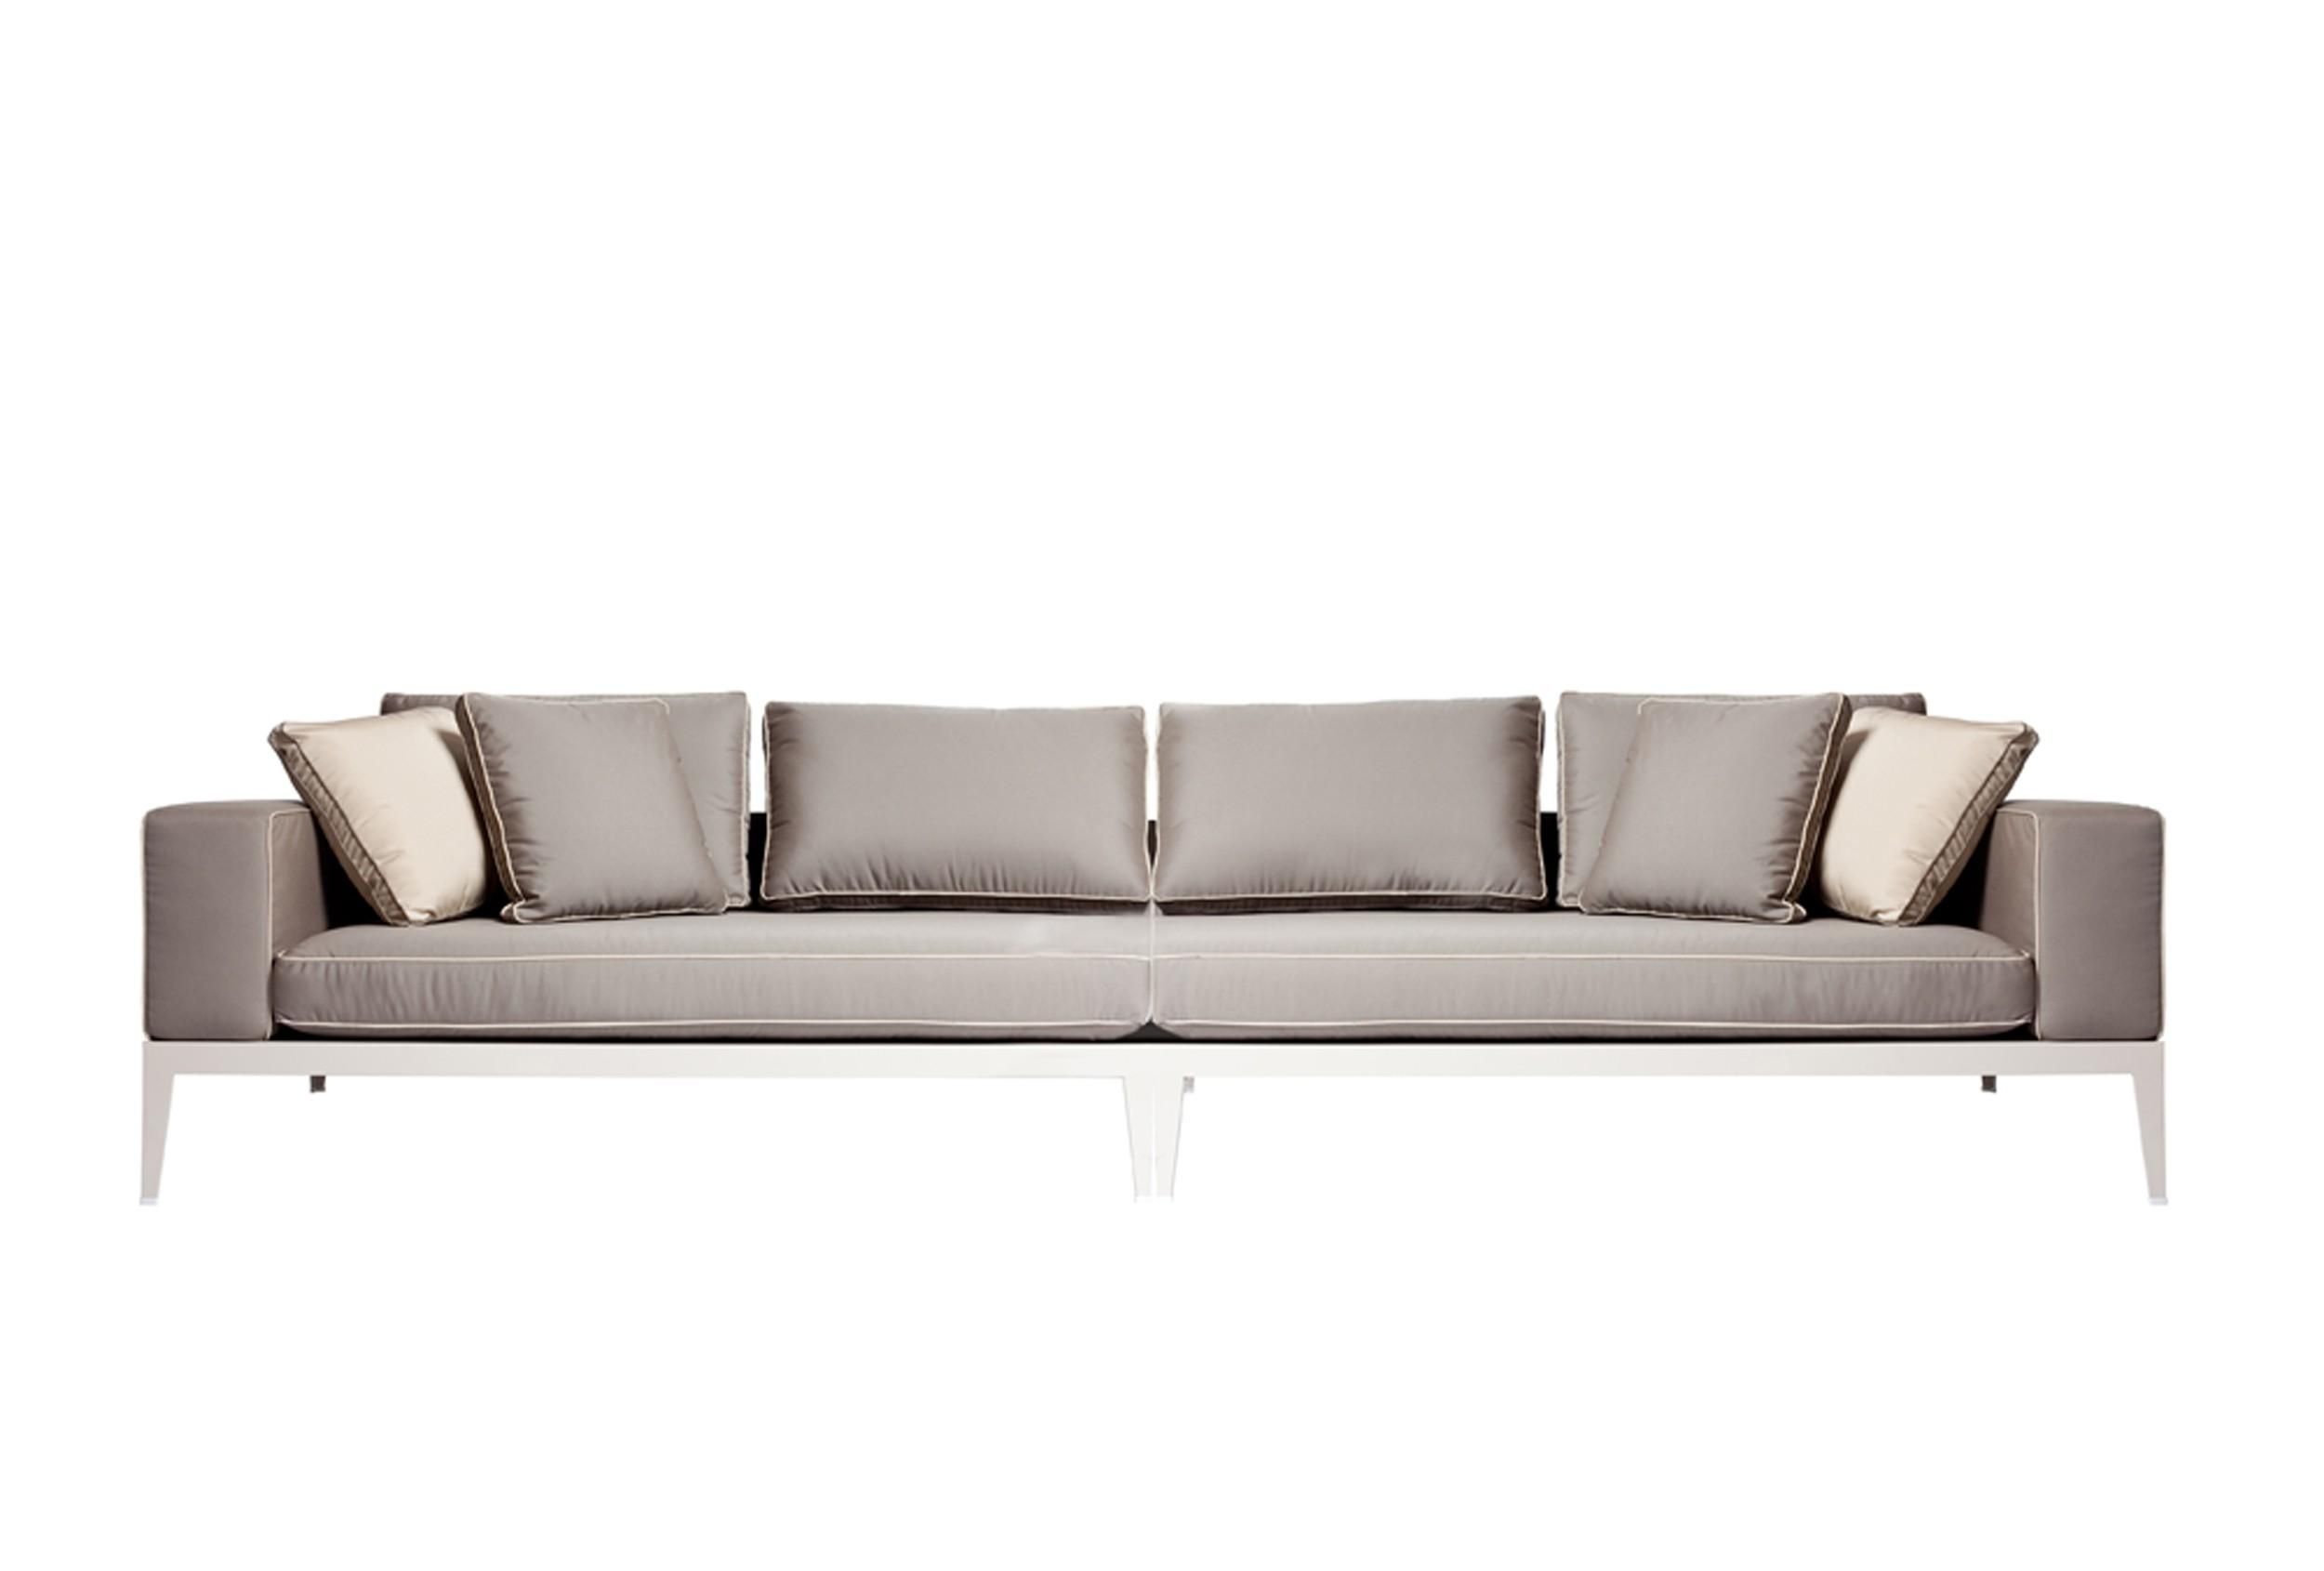 Balmoral 4 Seater Sofa | Viesso Intended For Four Seater Sofas (View 1 of 20)